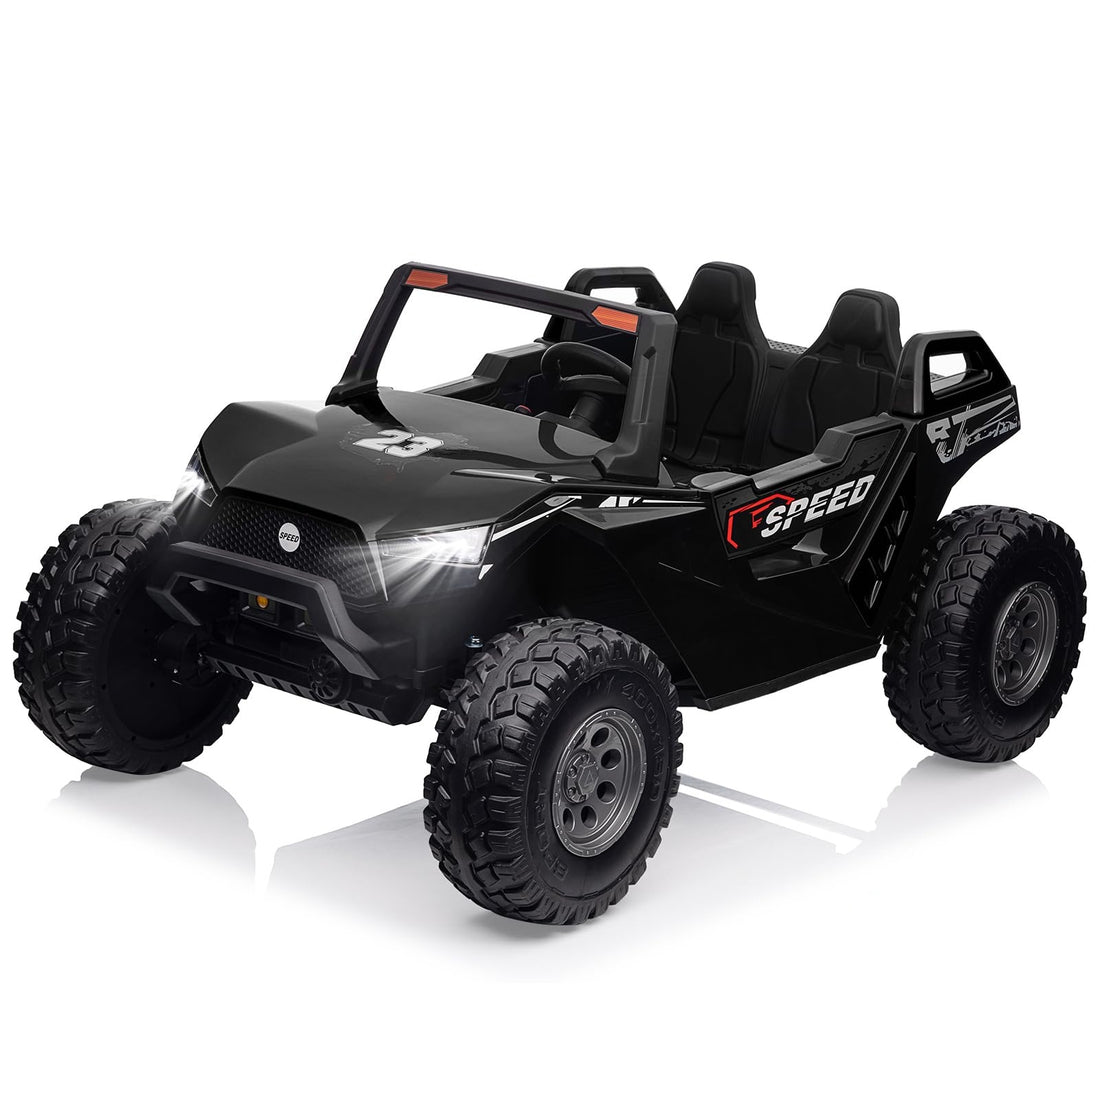 24V 2 Seaters Ride On UTV car with Remote Control for Kids, 4WD Motors Electric Vehicle, 21 Inch 2 Seats+One More Foldable Seat, 15.4 Inch Large EVA Wheels,Music, Light,Max Load 140LBS Ride Toy